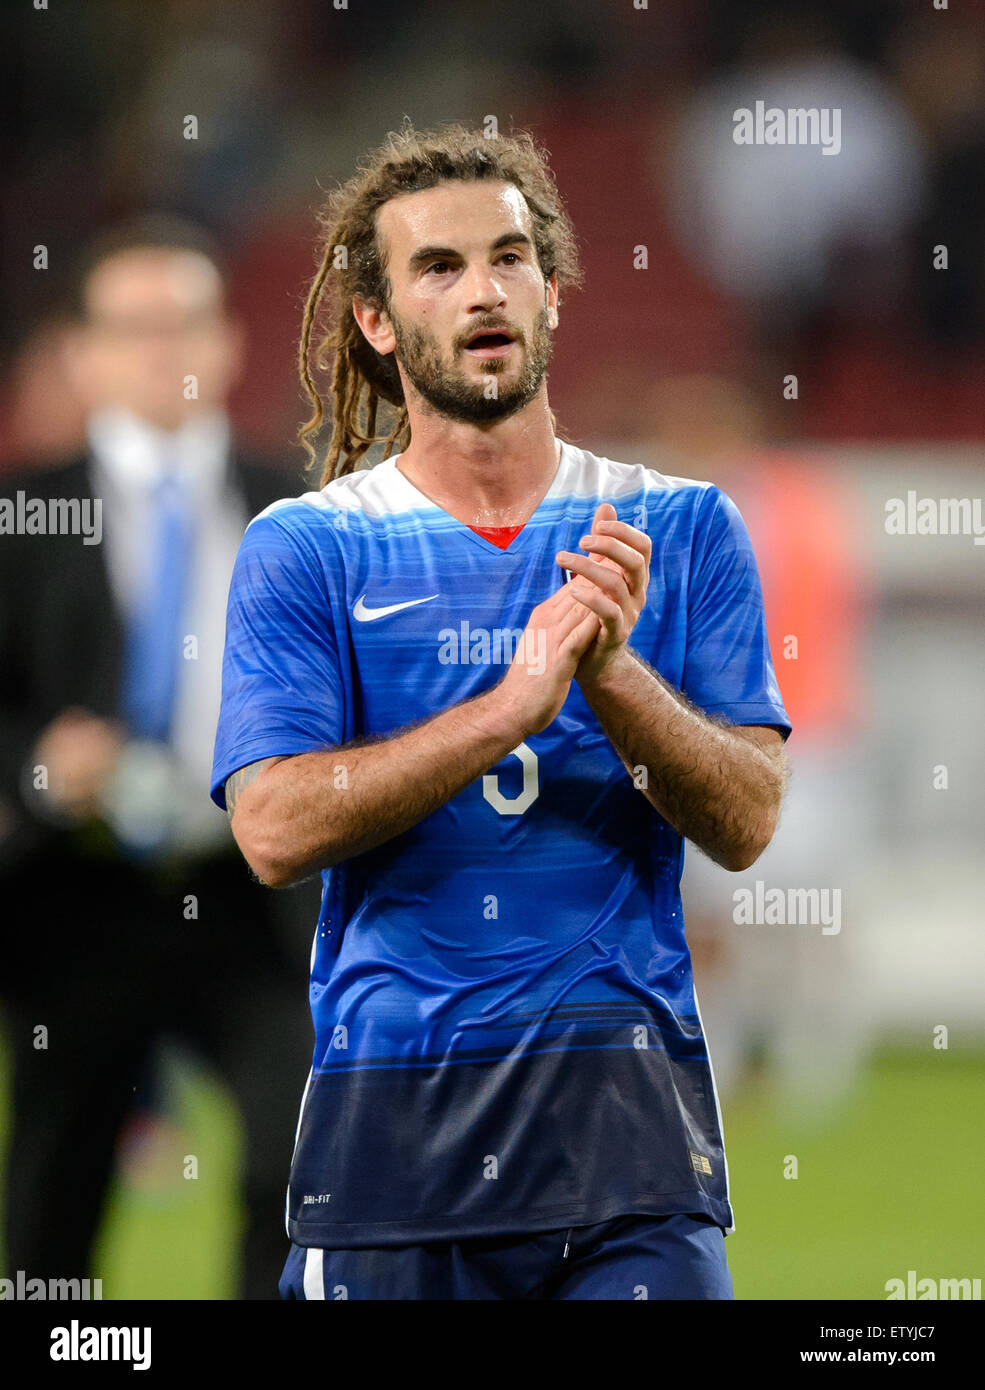 Cologne, Germany. 10th June, 2015. Kyle Beckerman of the USA celebrates after the international friendly soccer match between Germany and the USA at RheinEnergieStadion in Cologne, Germany, 10 June 2015. The USA won the match 2-1. Photo: Thomas Eisenhuth/dpa - NO WIRE SERVICE -/dpa/Alamy Live News Stock Photo